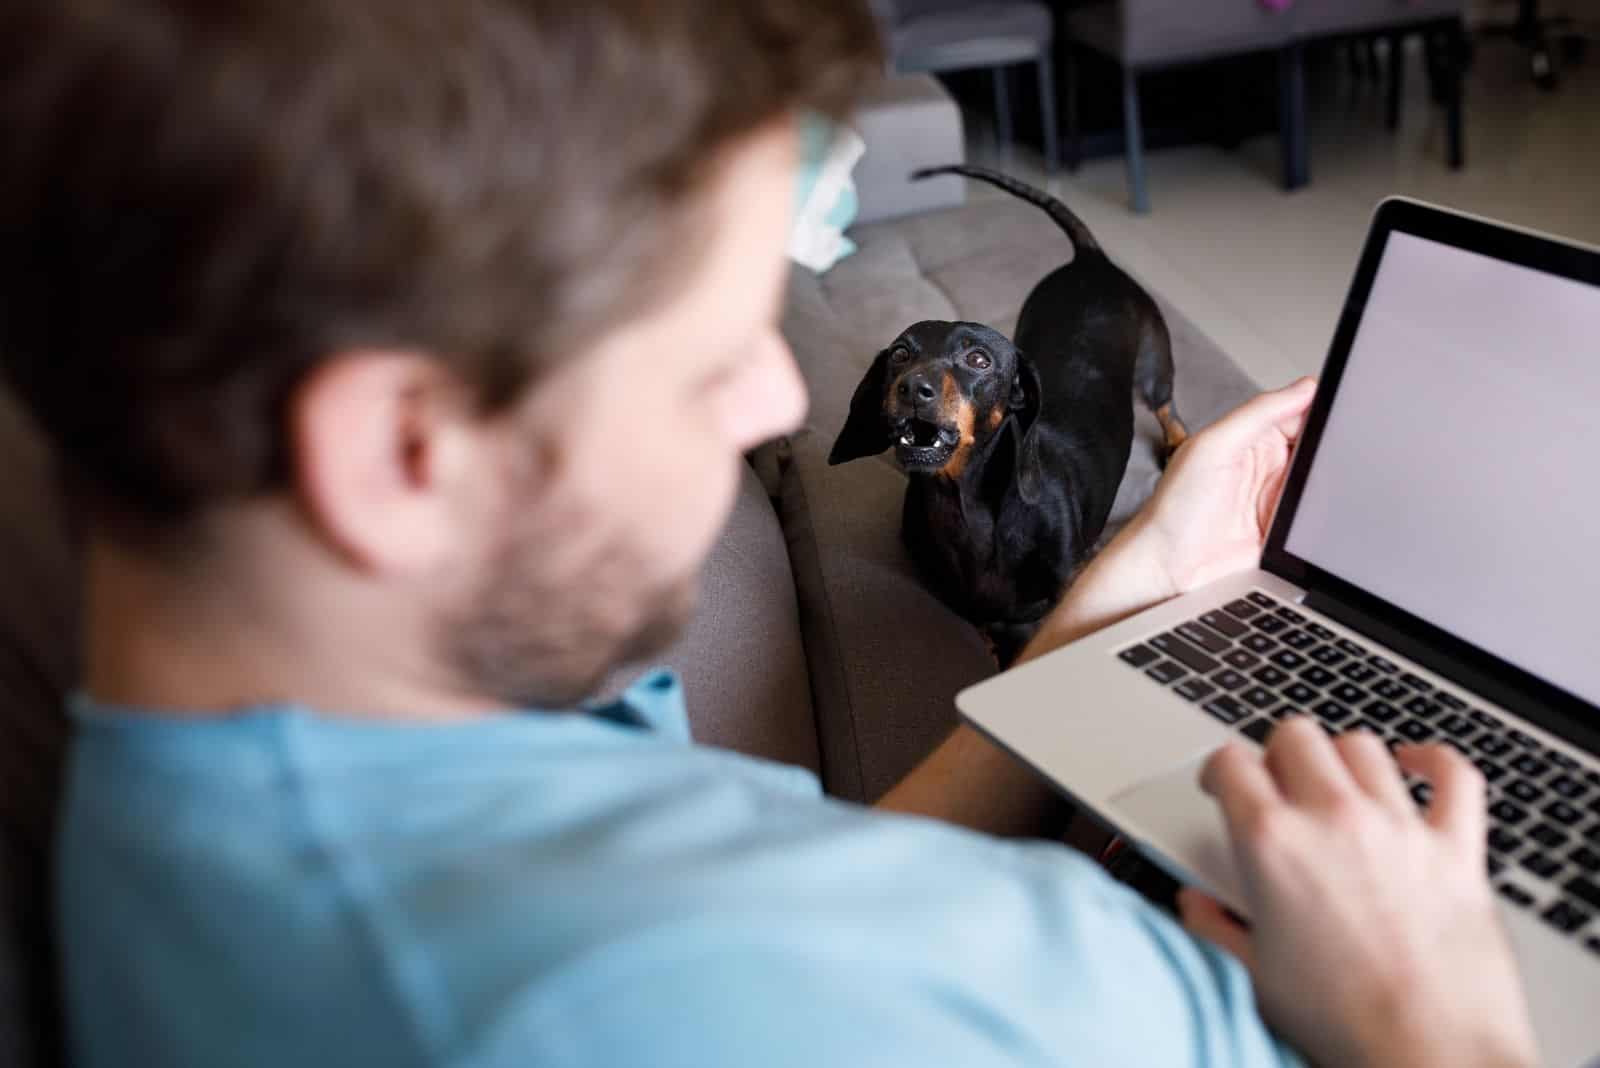 owner of the dachshund busy on laptop while the dog barking at him